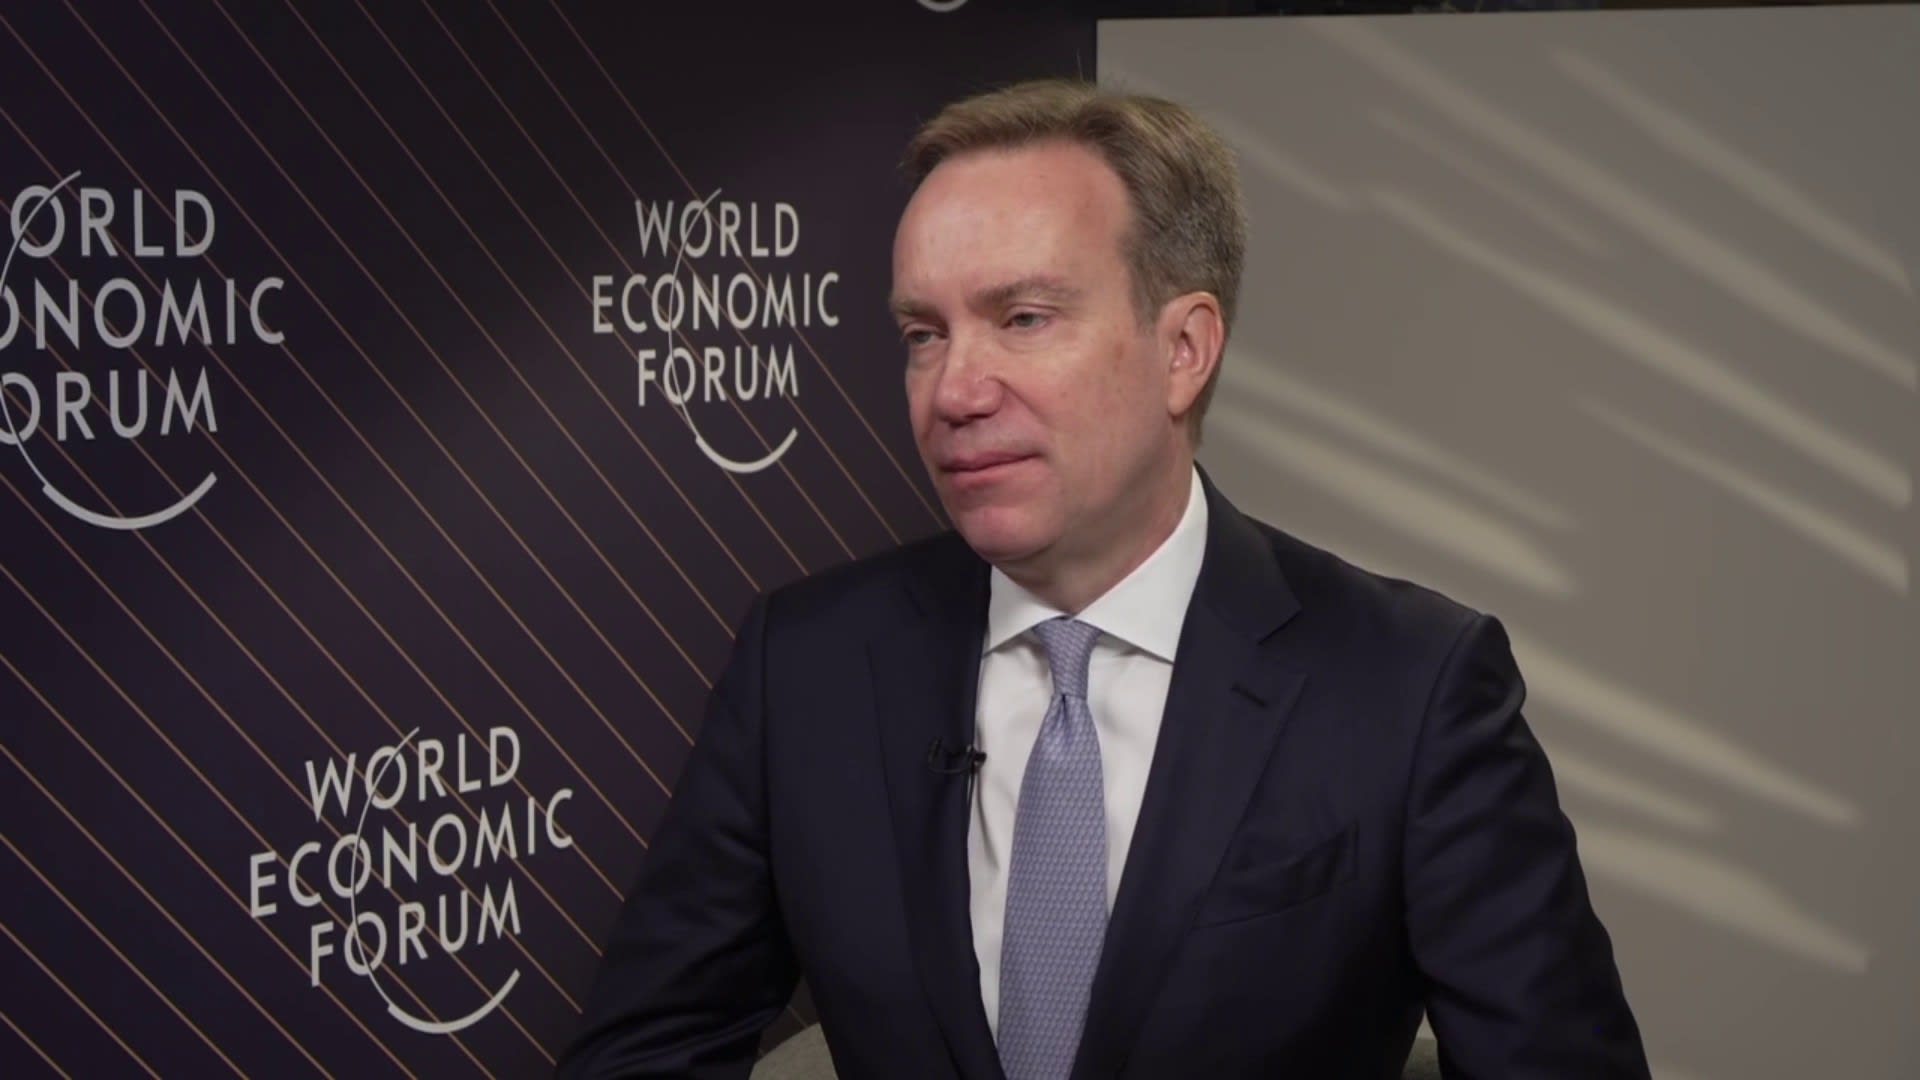 WEF president: Gaza crisis is at the ‘core’ of Middle East tensions [Video]